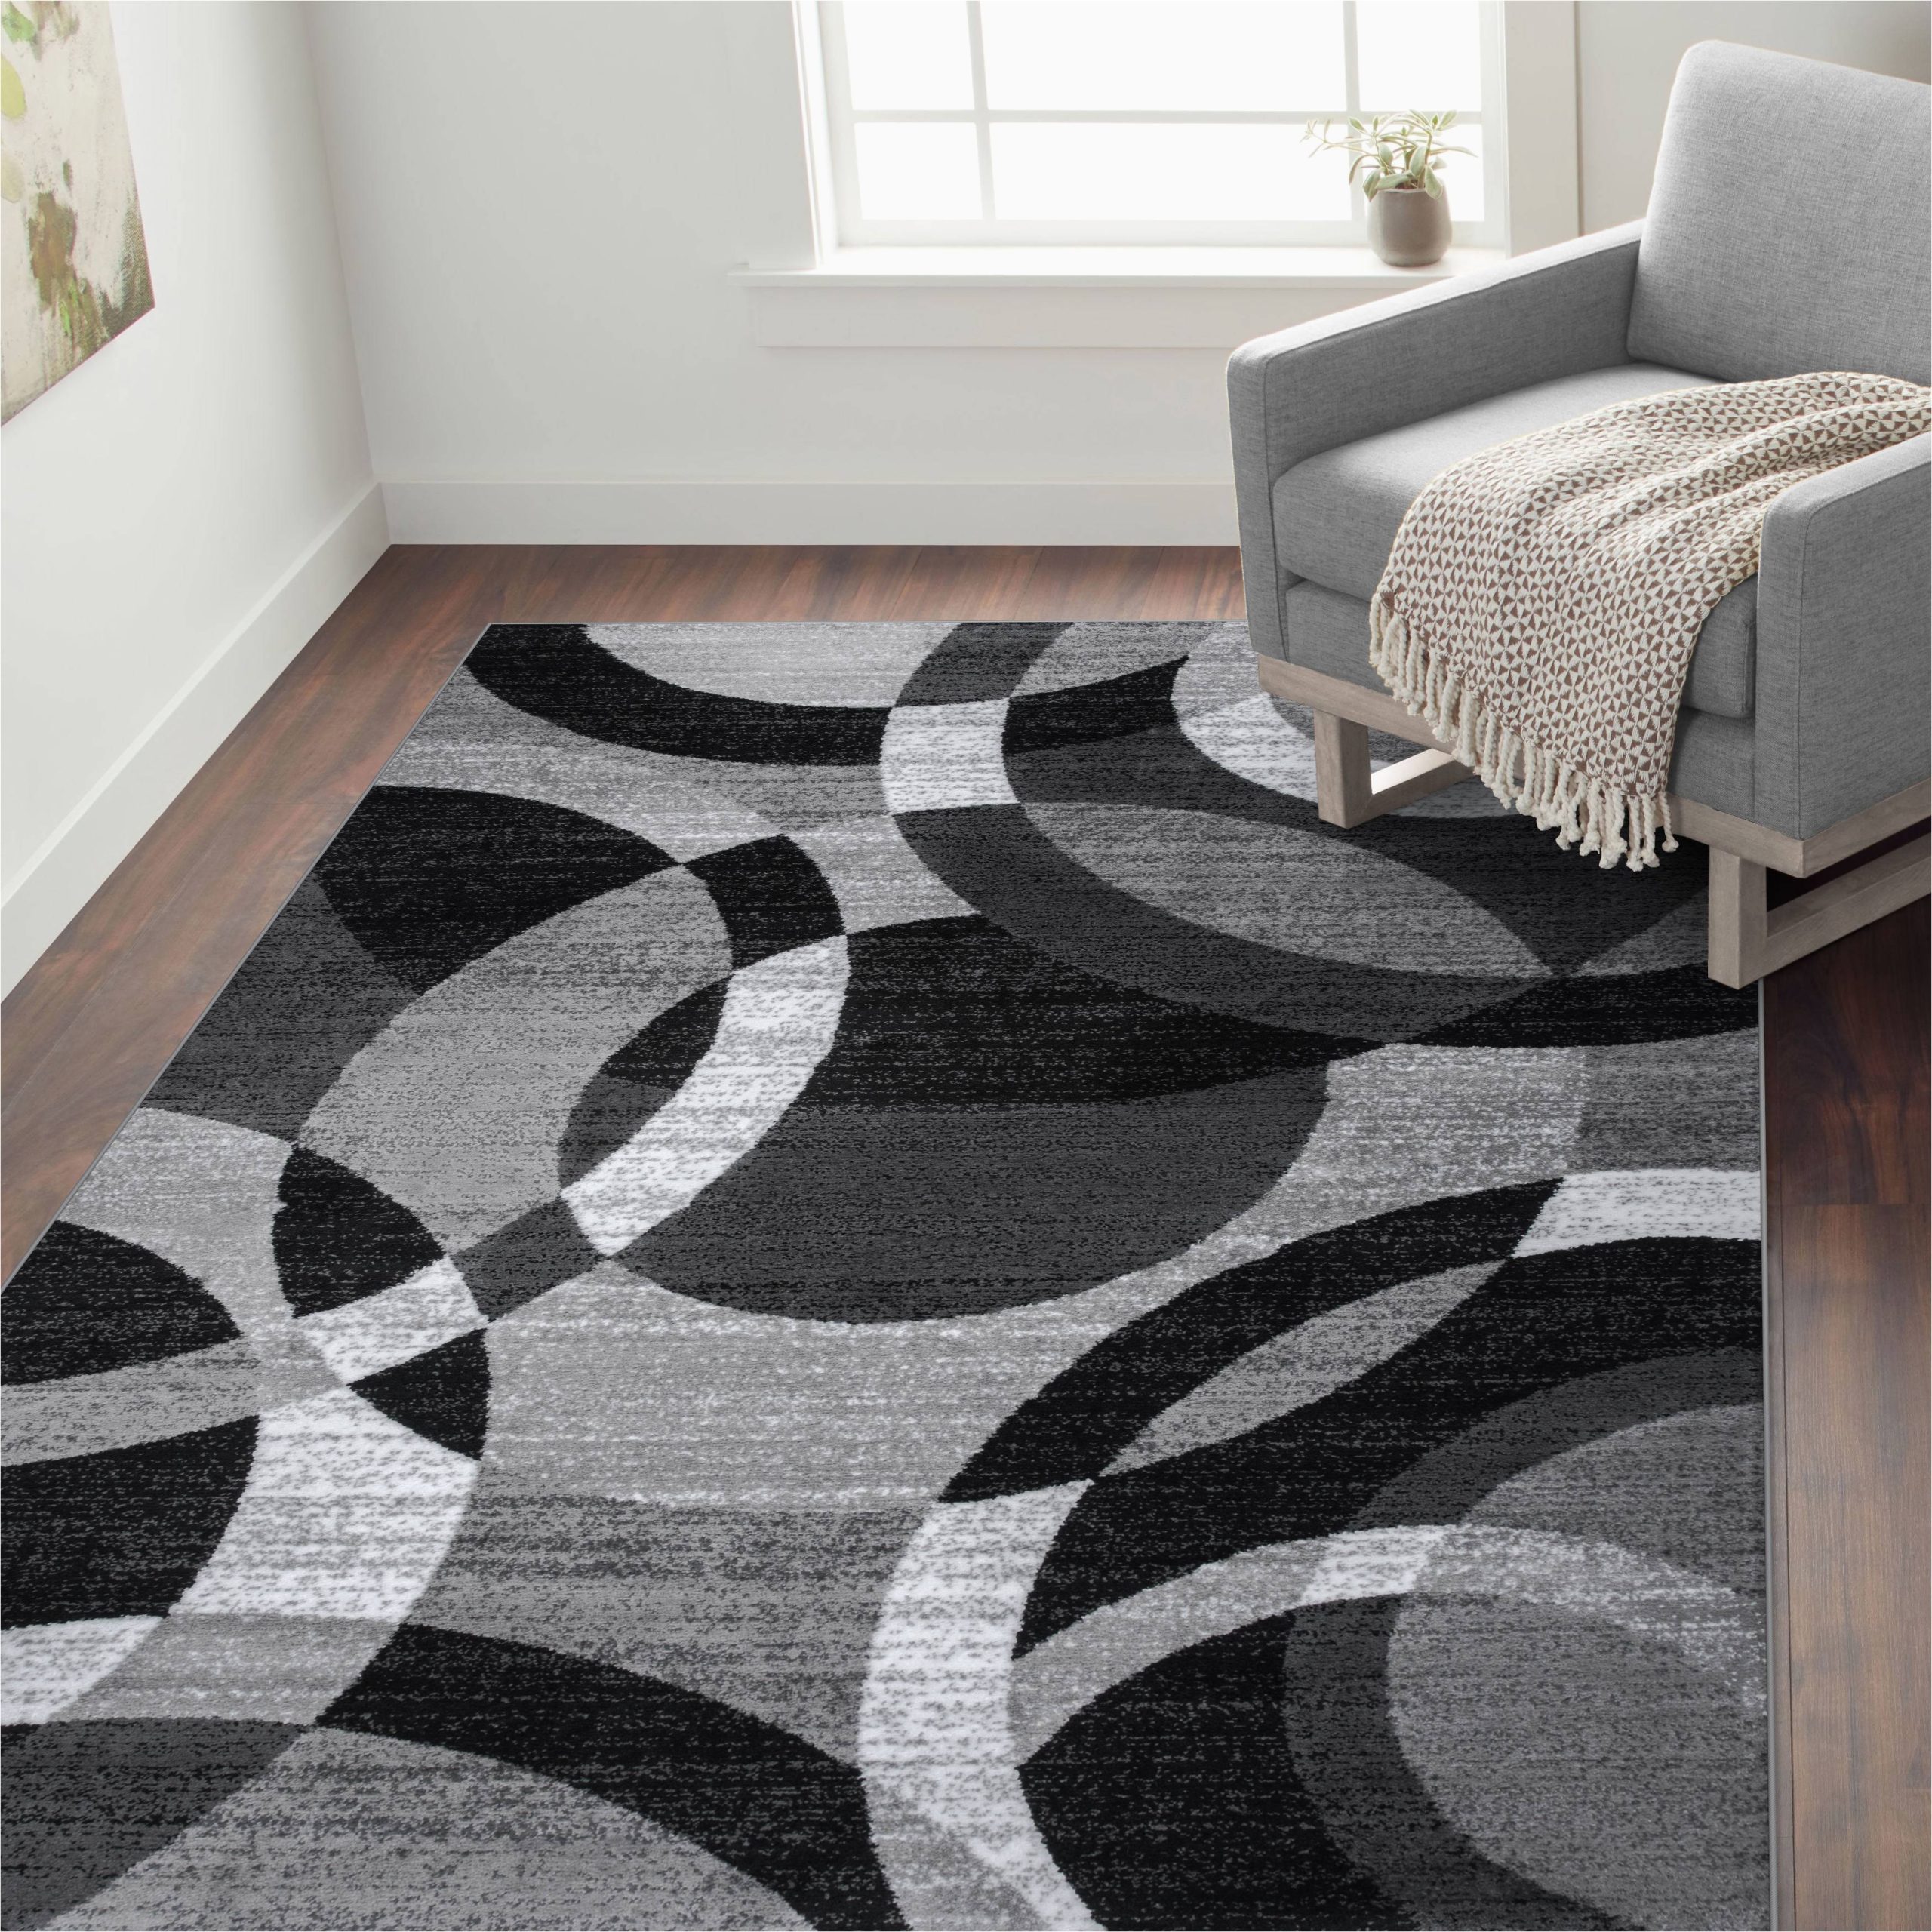 Contemporary area Rugs with Circles Rugshop area Rugs Modern Contemporary Circles Abstract Rug New Living Room Rugs